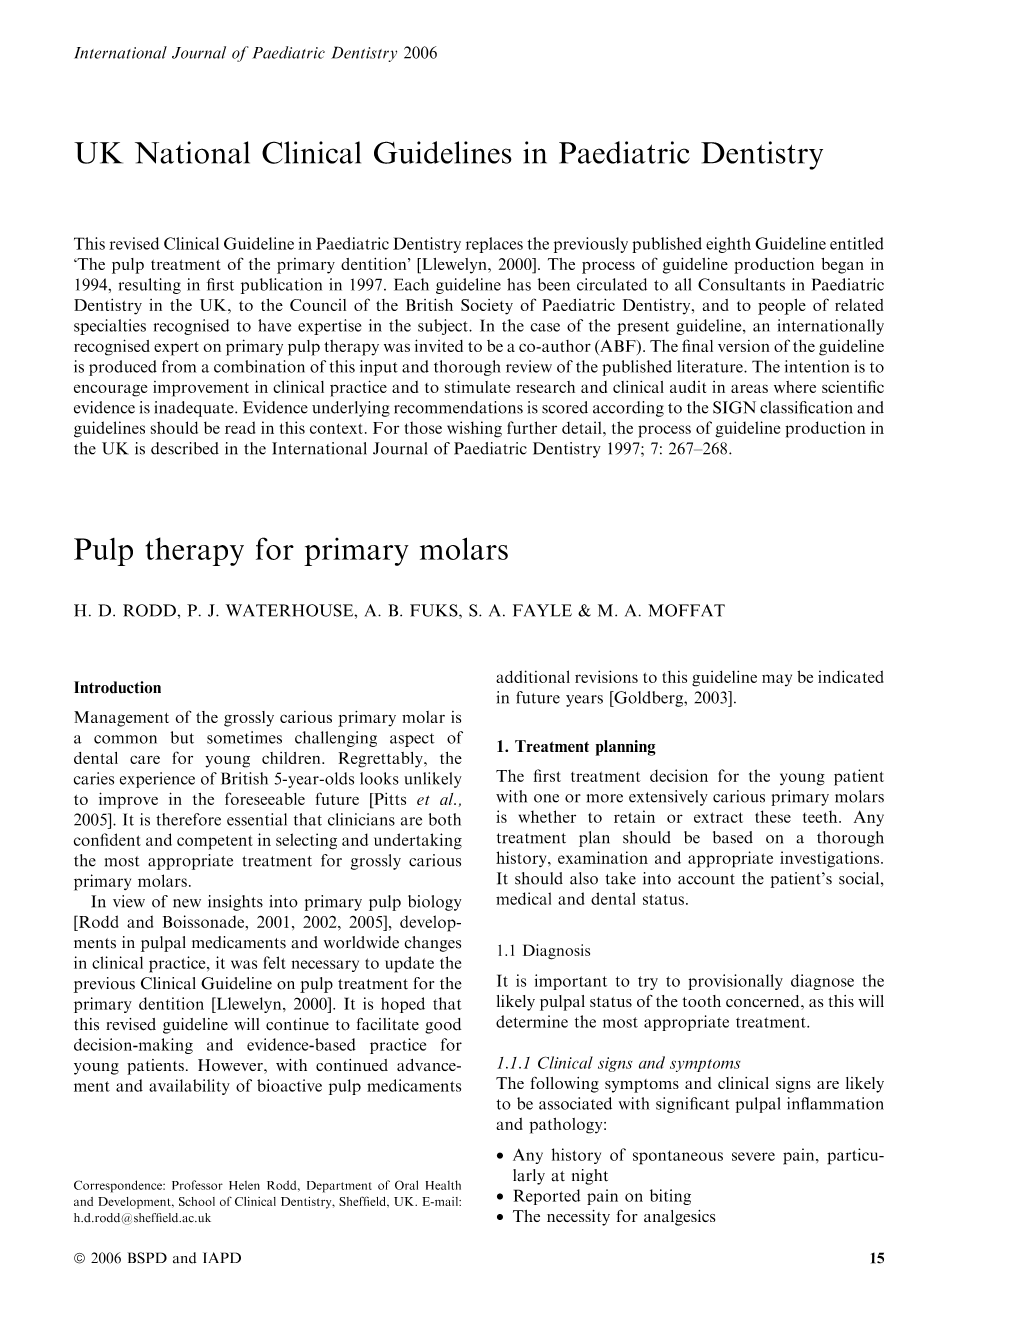 UK National Clinical Guidelines in Paediatric Dentistry Pulp Therapy For